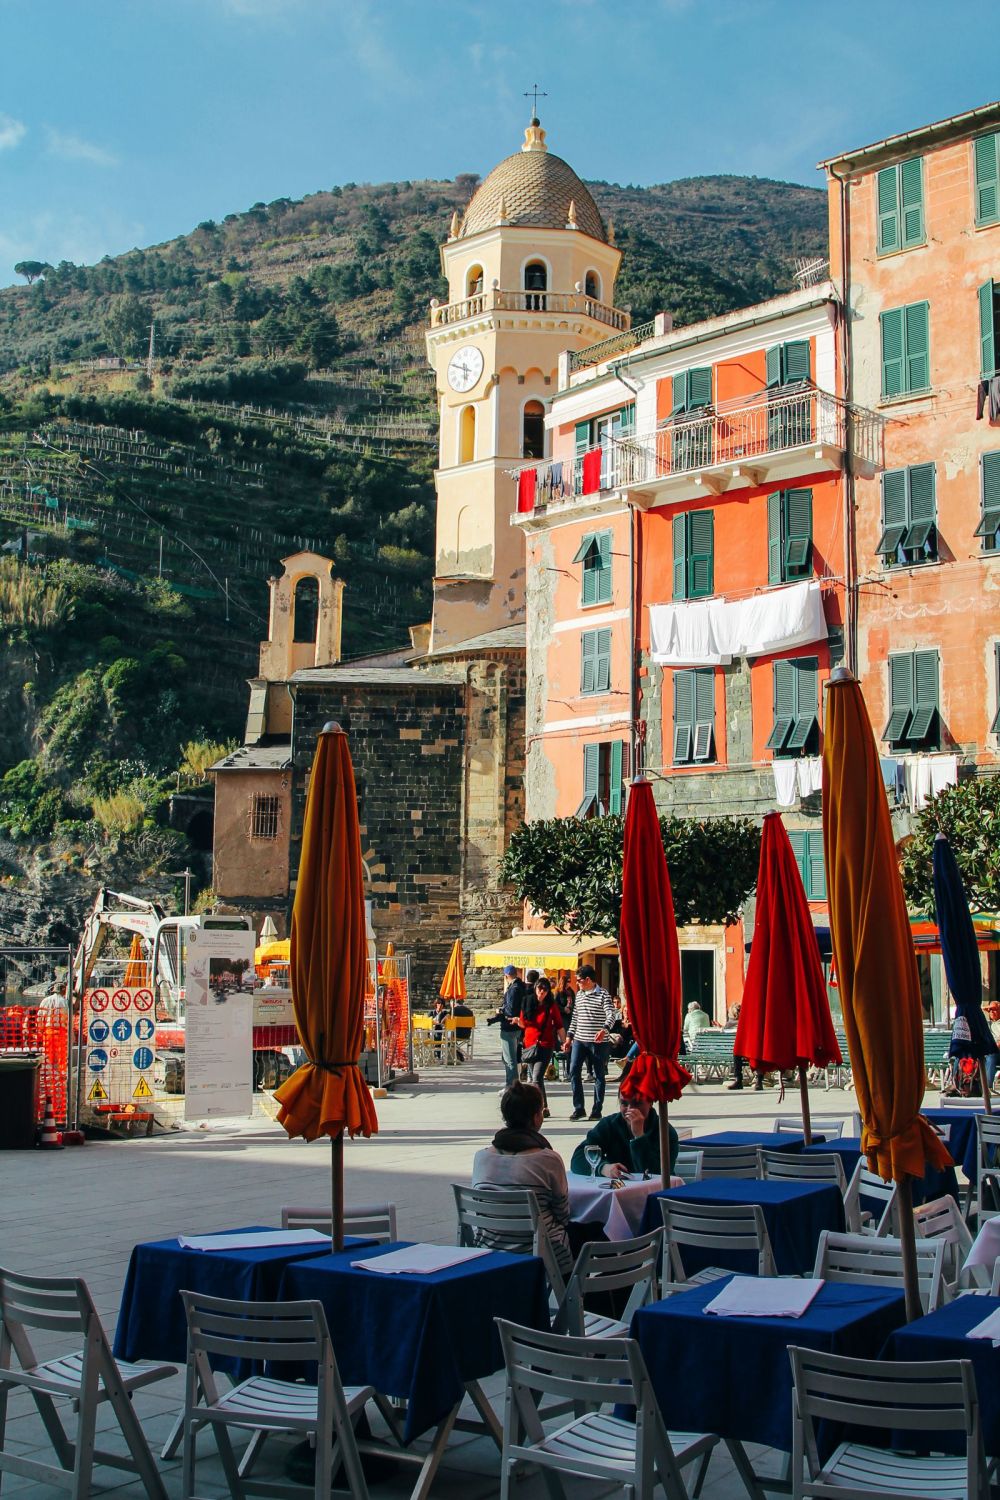 Vernazza in Cinque Terre, Italy - The Photo Diary! [4 of 5] (27)